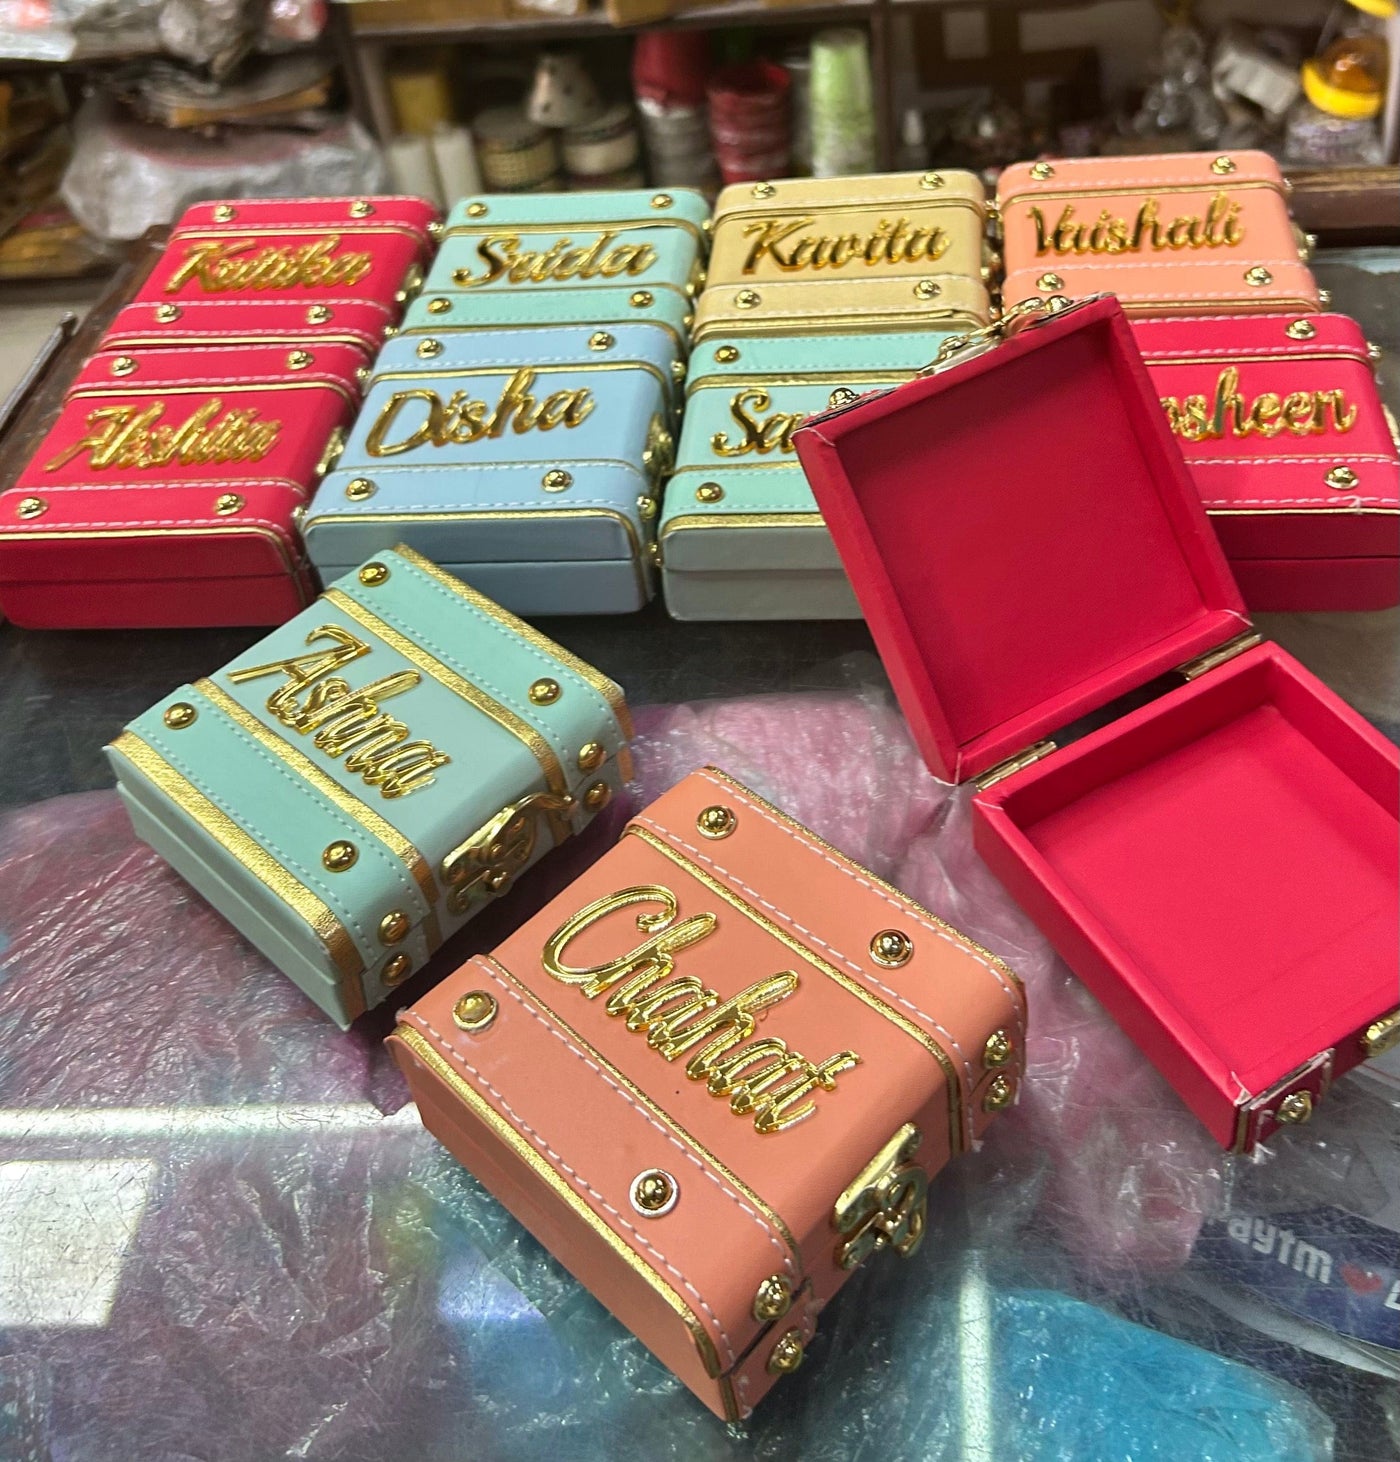 160 rs each on buying 30 pcs / WhatsApp at 8619550223 to order 🔥 leatherite boxes Customized mini trunk boxes for gifting 🎁 / small leatherite lock boxes for wedding favors and birthday anniversary return gifts